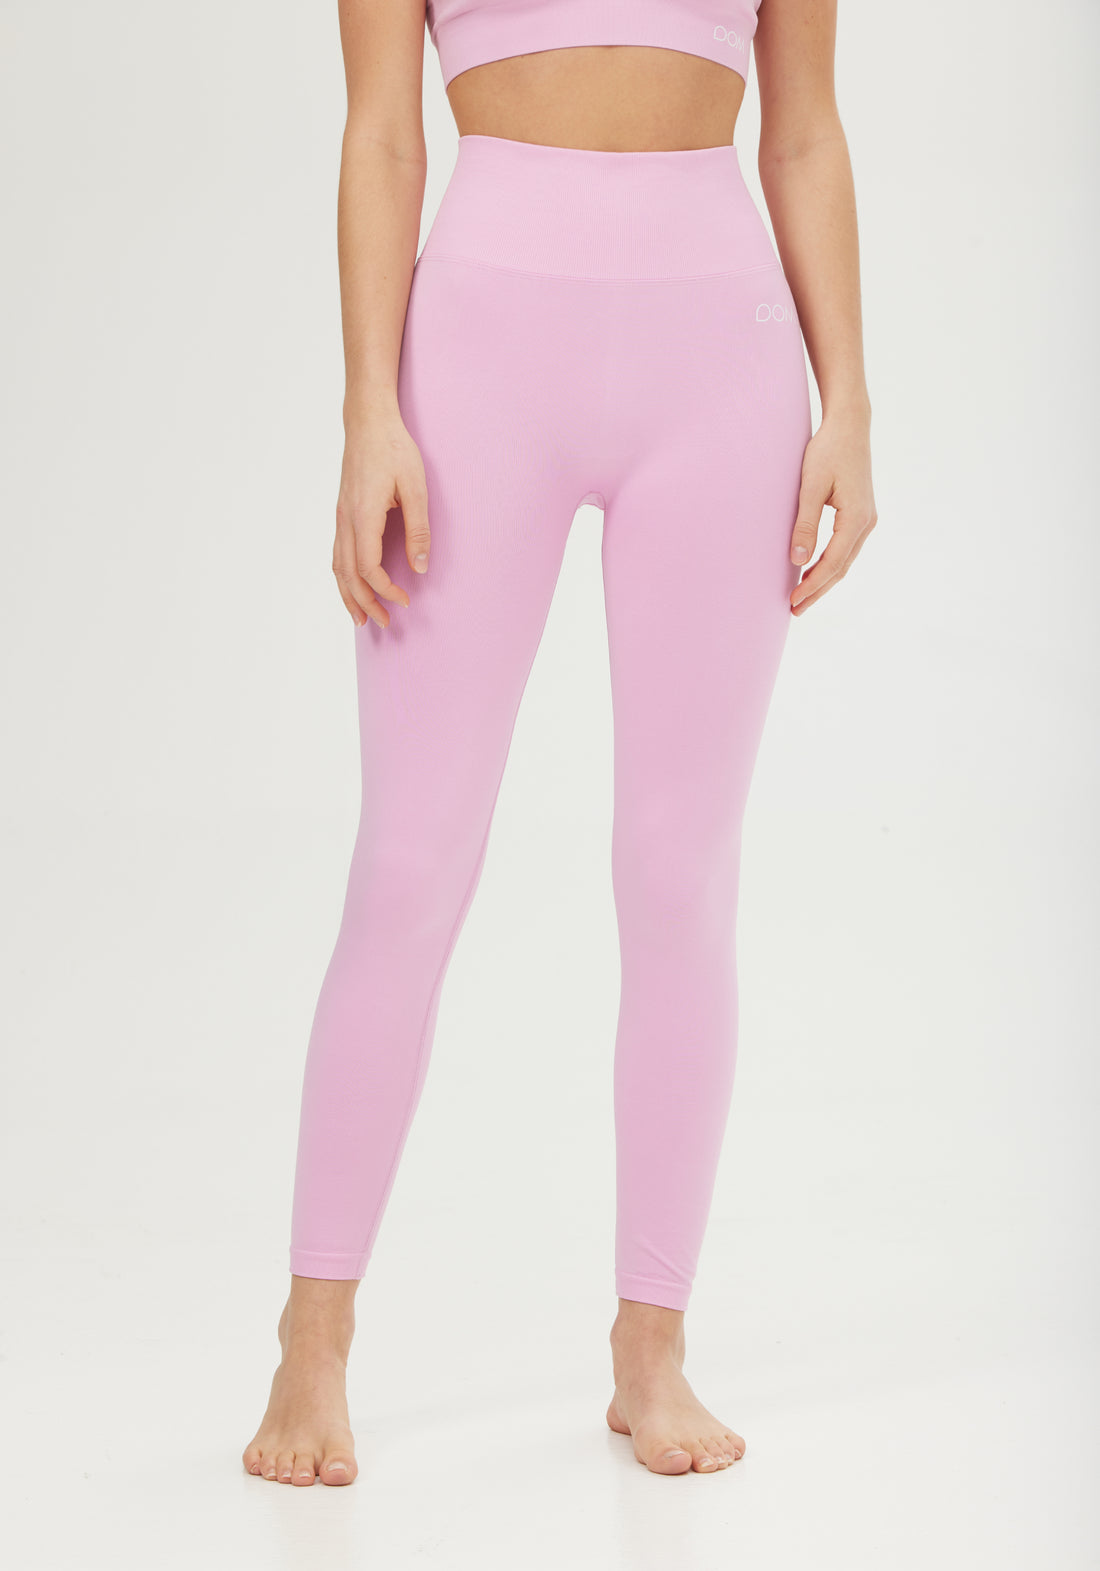 Sesh Tights Seamless Pink Luxe